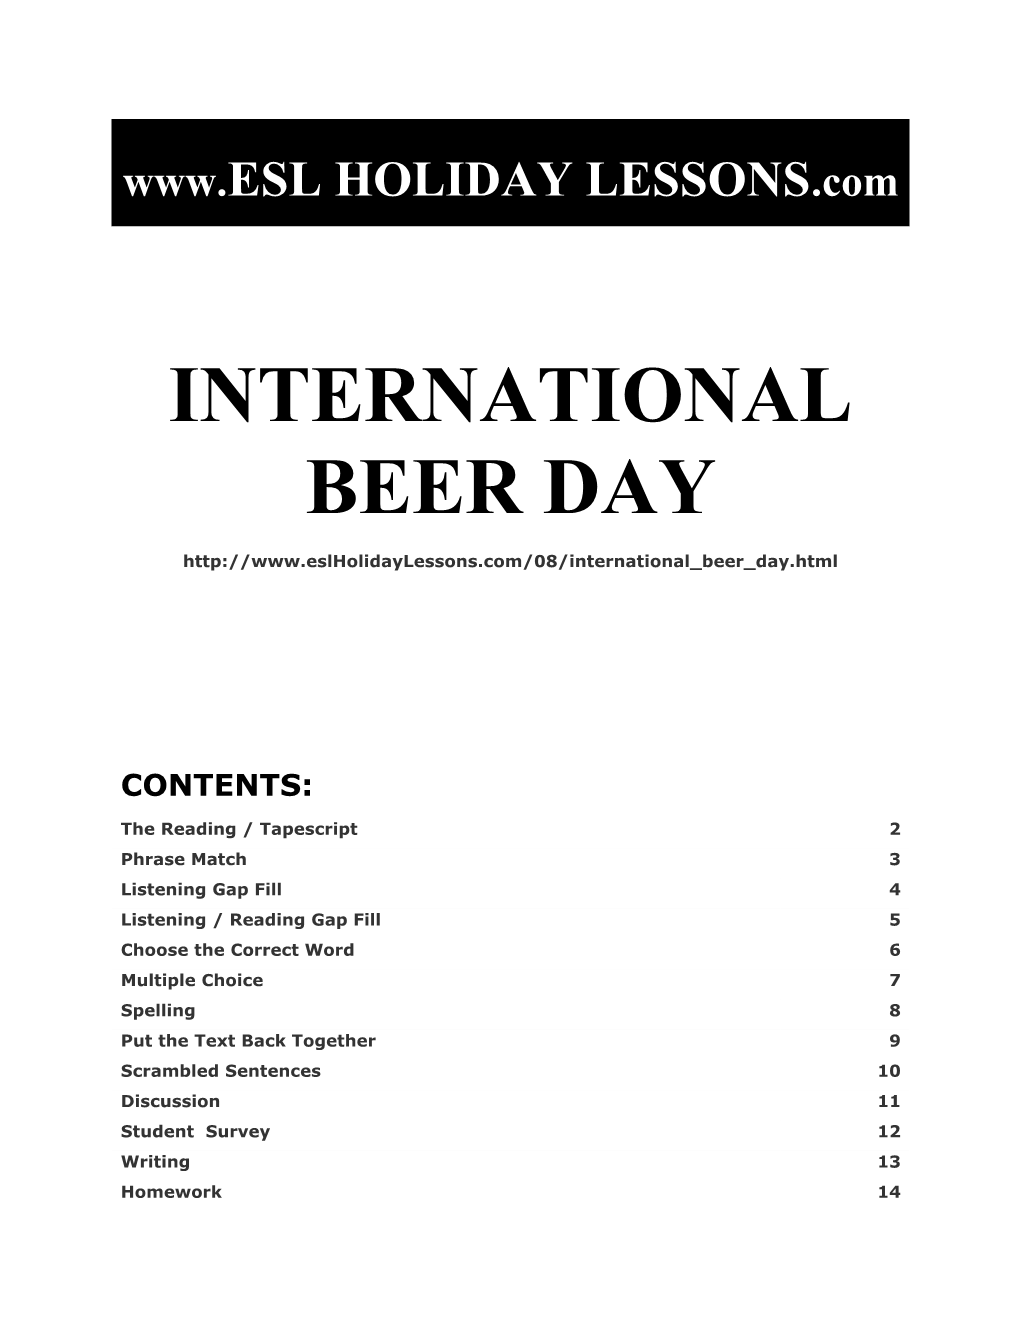 Holiday Lessons - International Beer Day